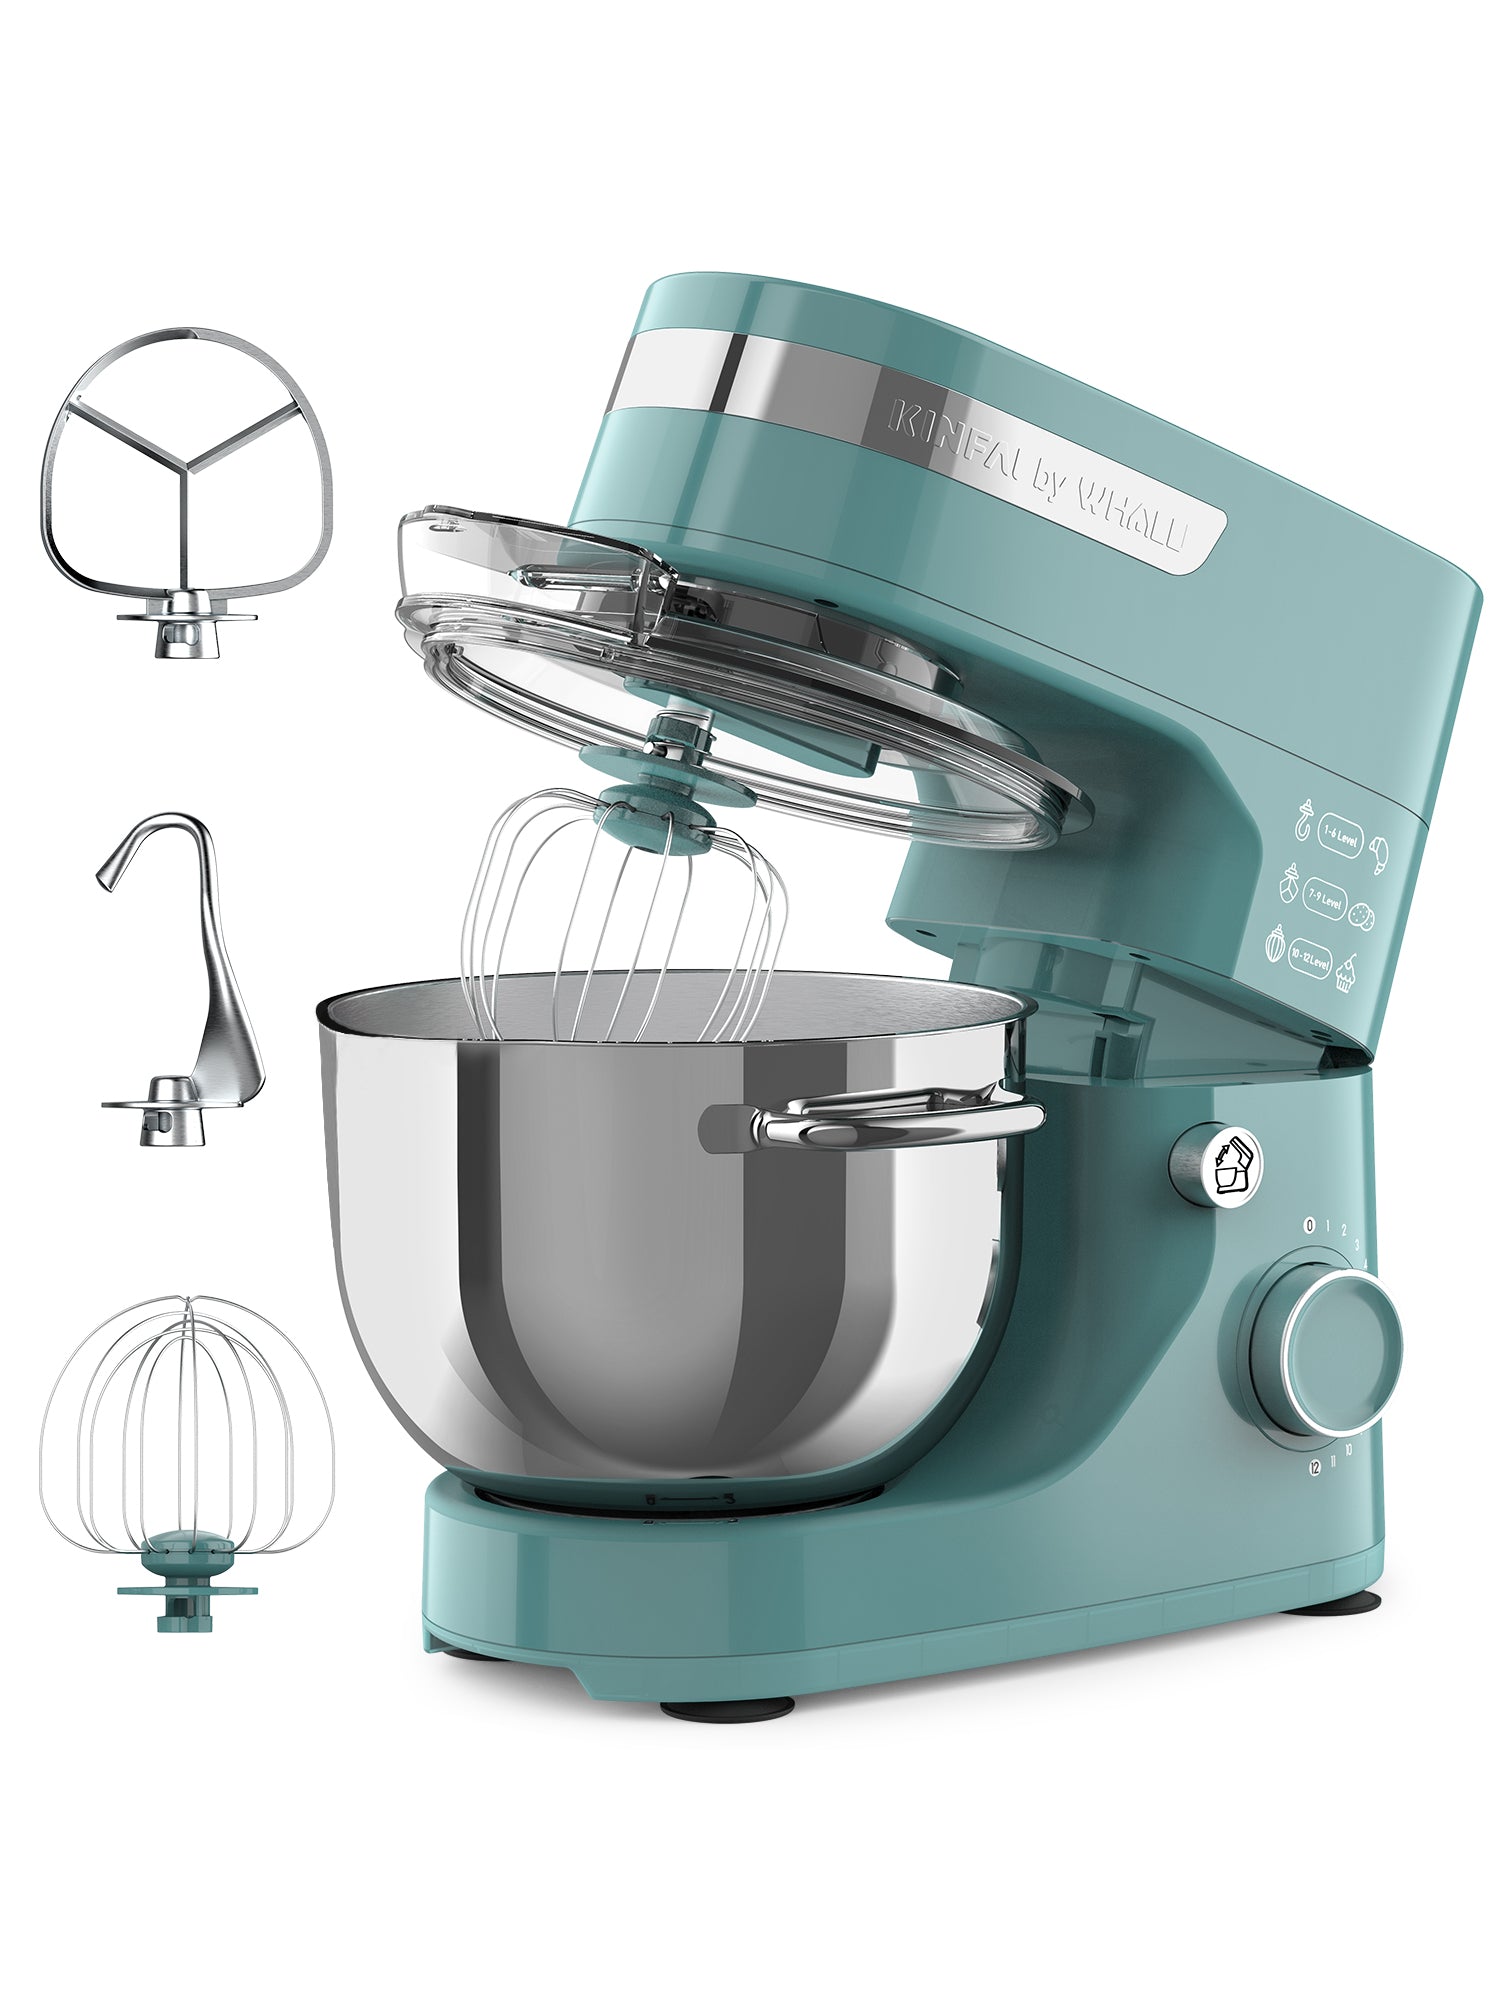 Kinfai Electric Kitchen Stand Mixer Machine with 5.5 Quart Bowl for Cake and Bread Making, Egg Beating, Baking, Dough,Cooking